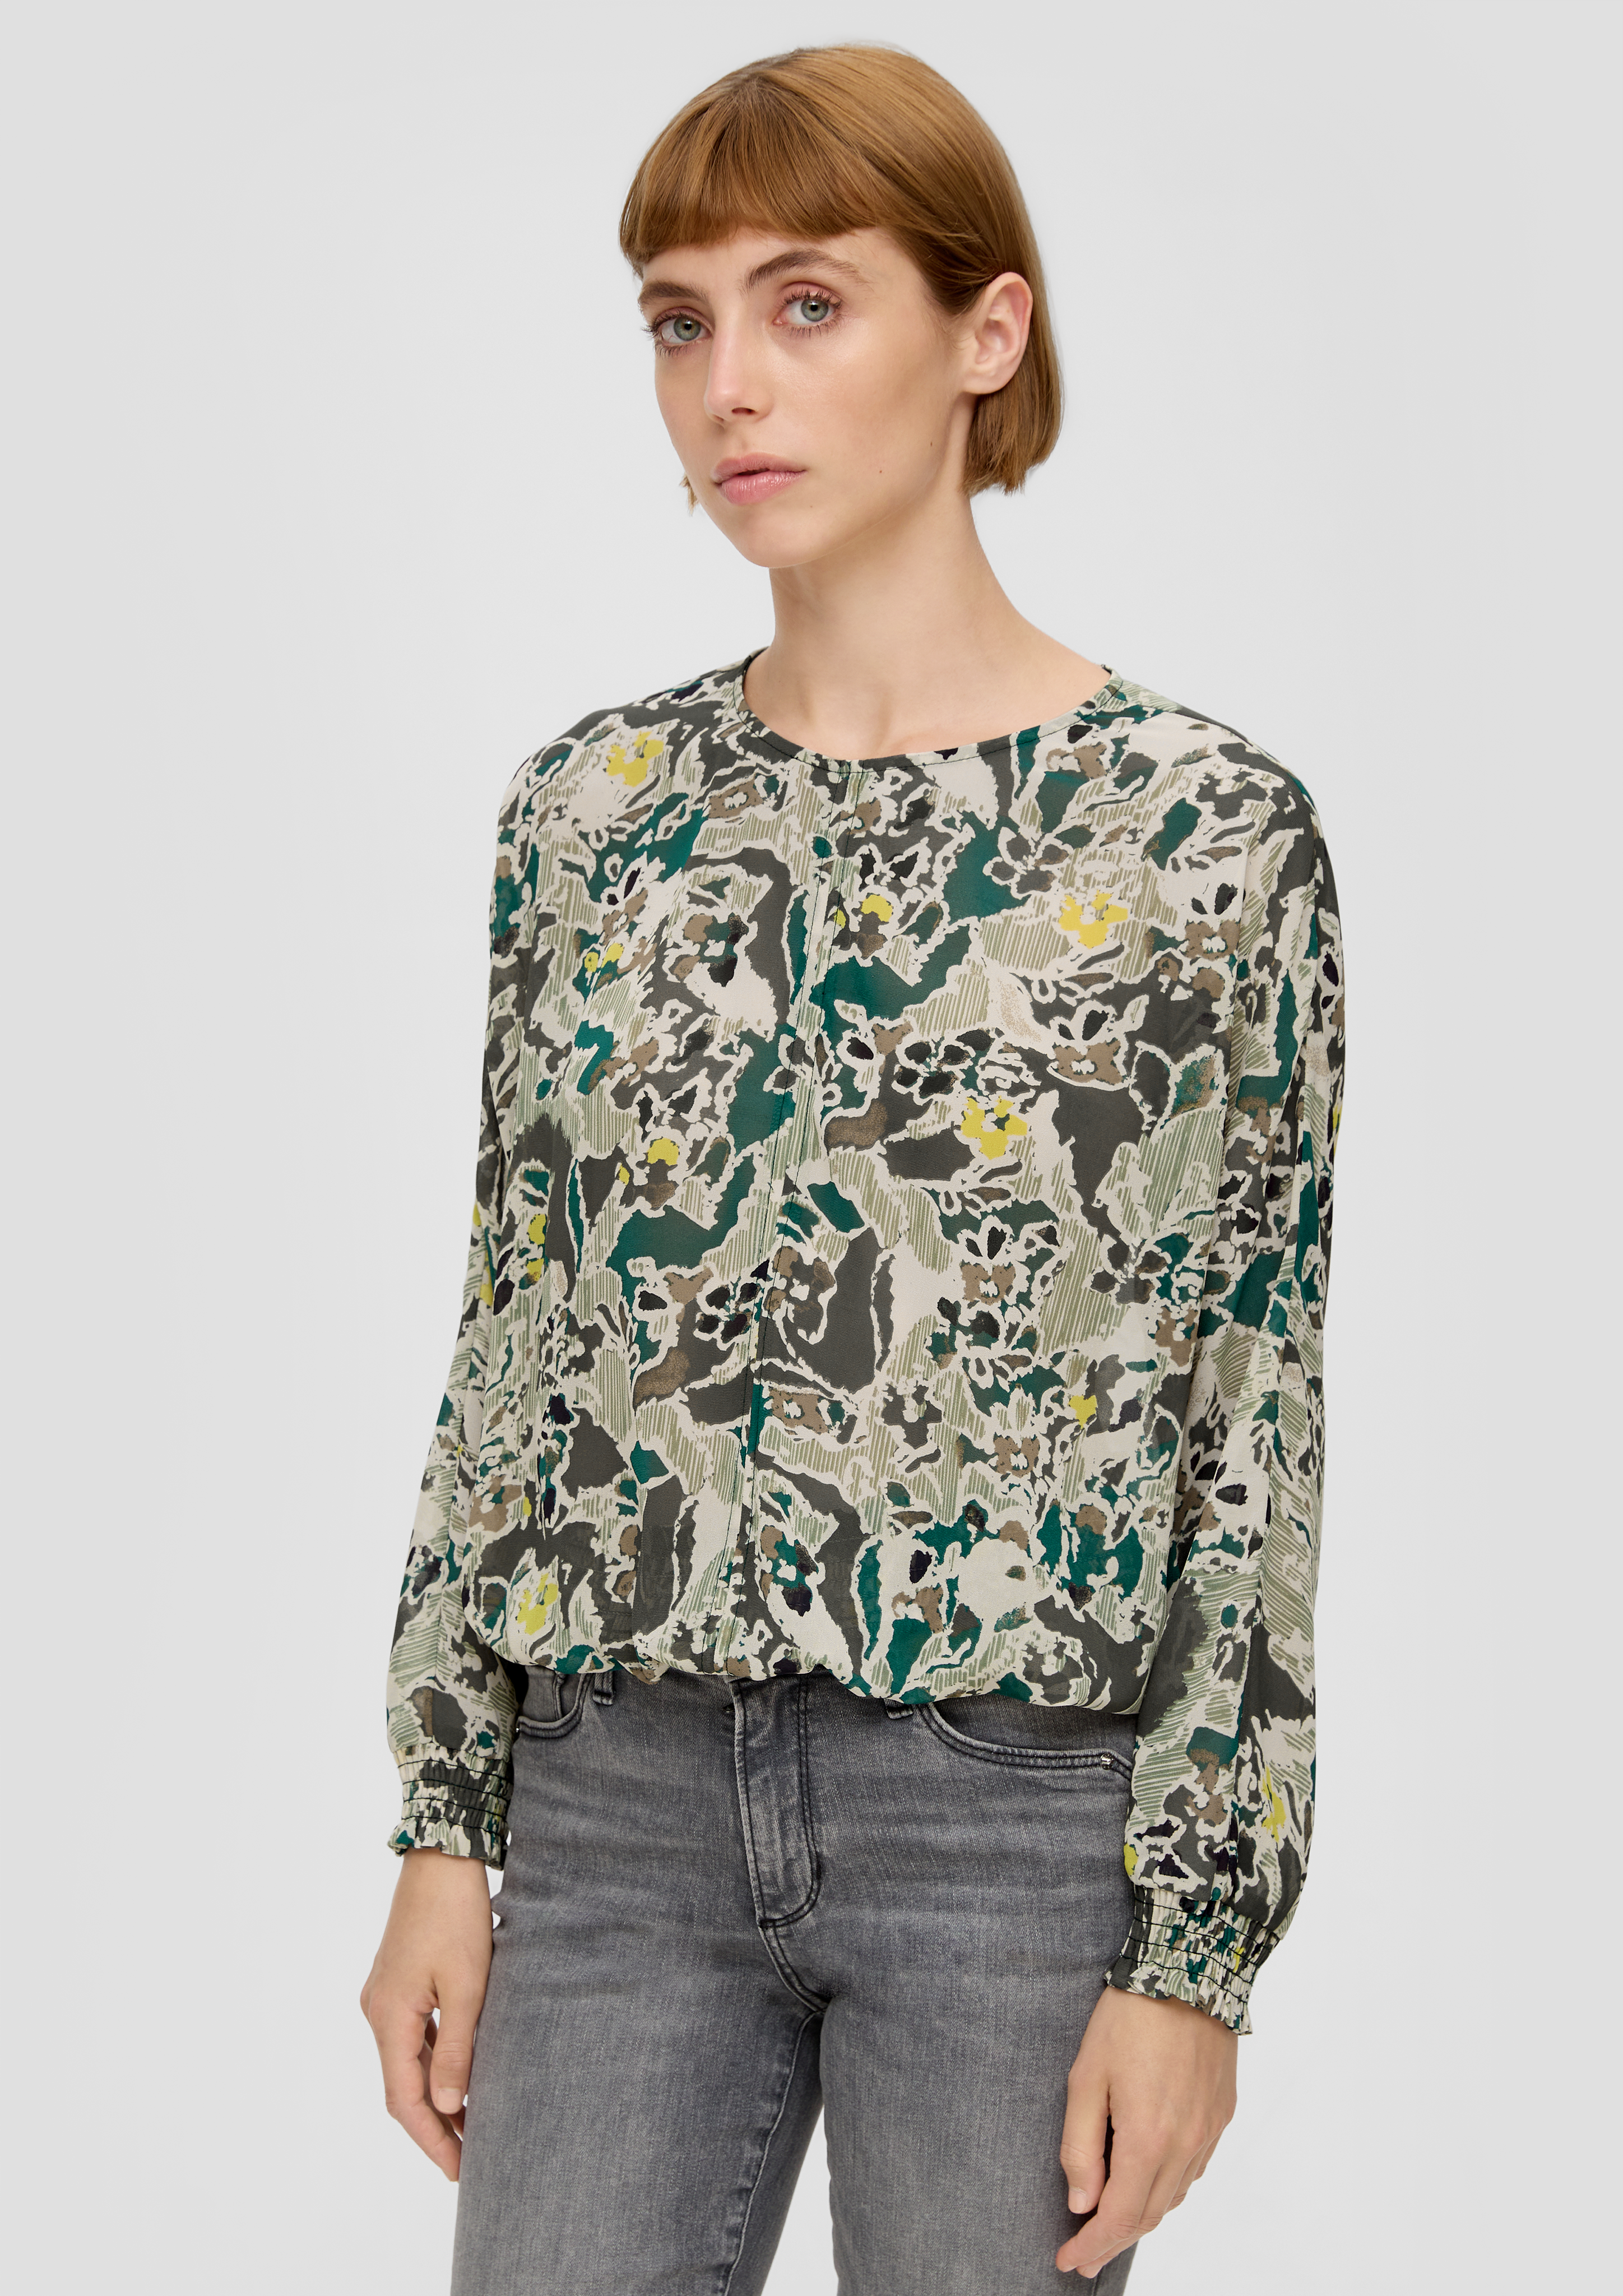 Chiffonbluse mit Allover-Muster - petrol